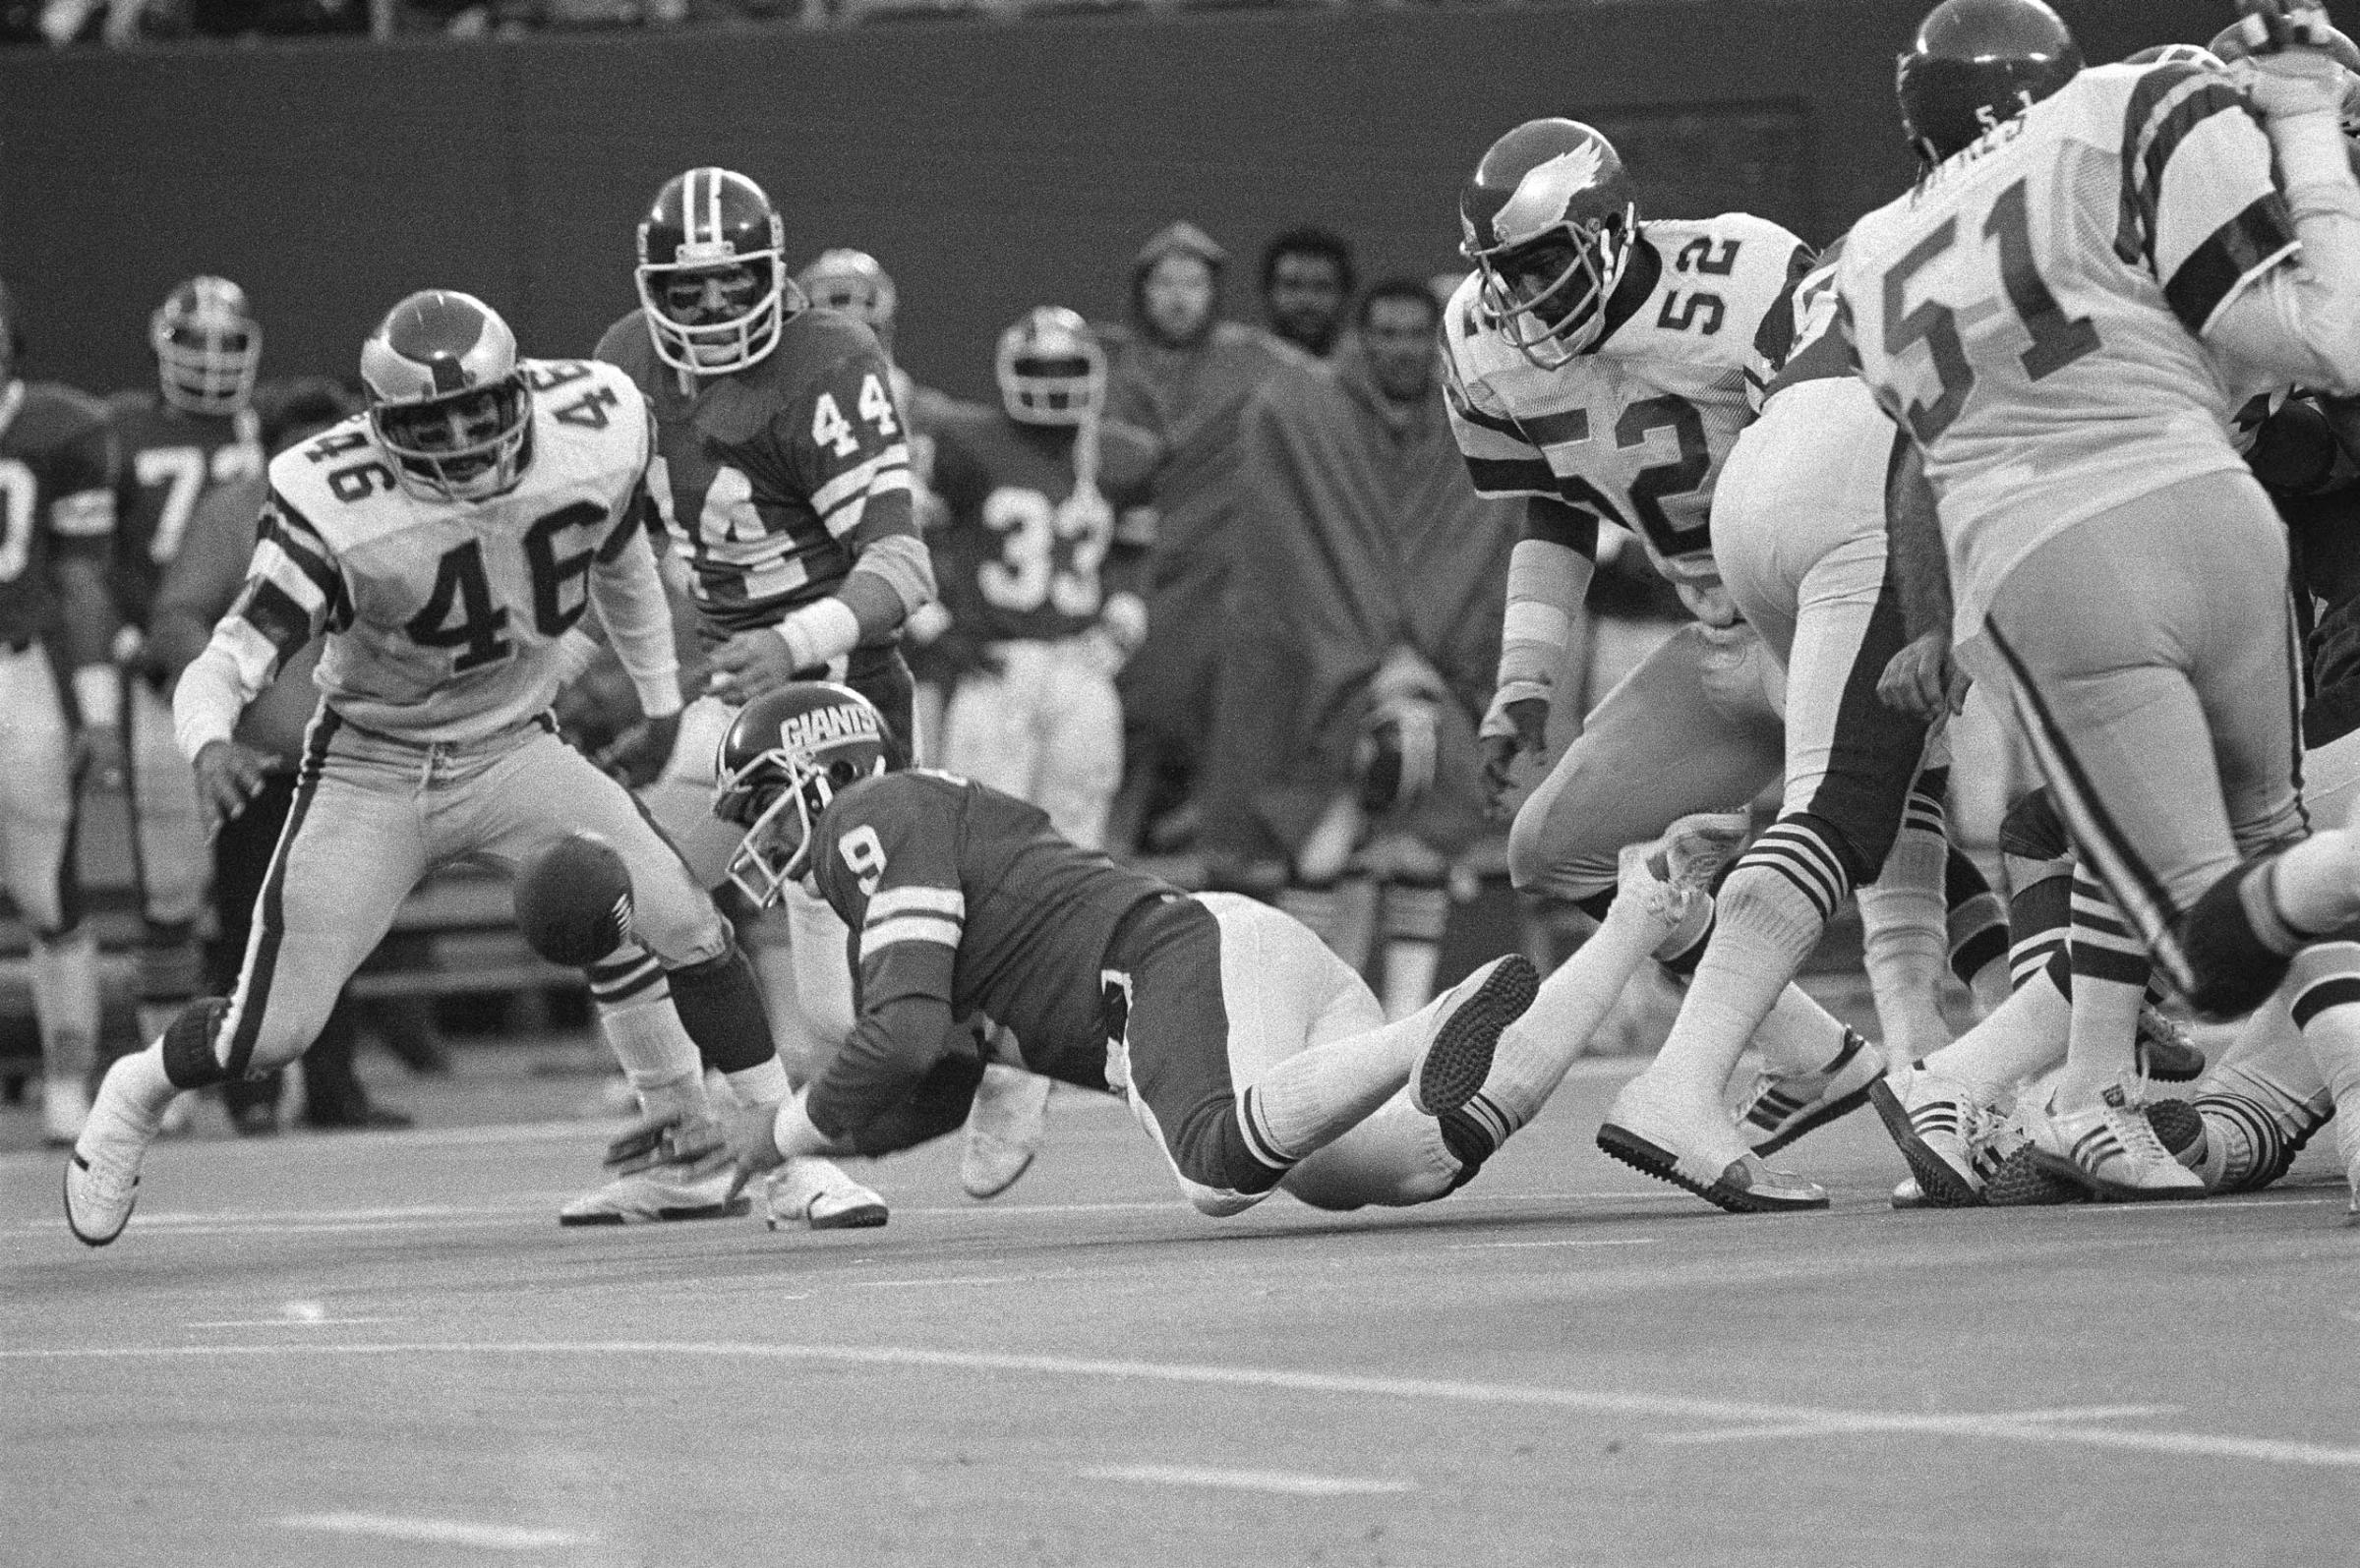 Herman Edwards (46) of the Philadelphia Eagles chases the New York Giant fumble during the final minutes of the contest in East Rutherford, N.J., Nov. 19, 1978. The Giants' quarterback Joe Pisarcik (9) had trouble with the hand off and Edwards was able to go in with the score. The Eagles surprised the Giants 19-17. (AP Photo/G. Paul Burnett)